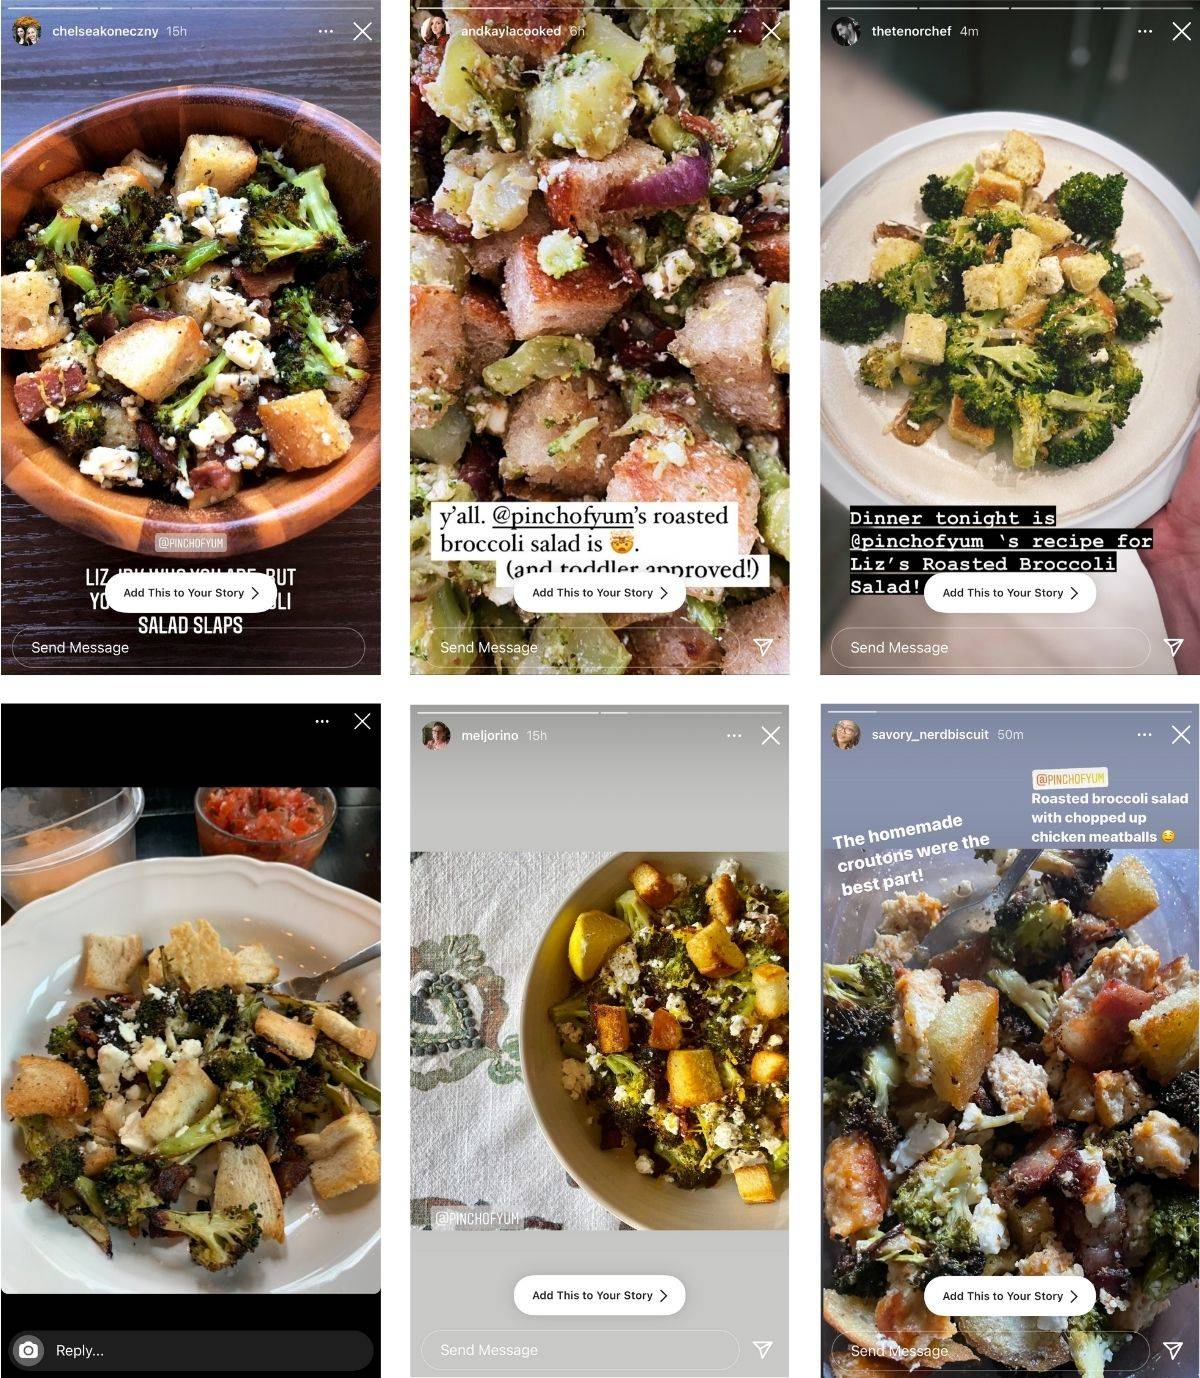 6 readers made the recipe and sent us photos. This is their collage.